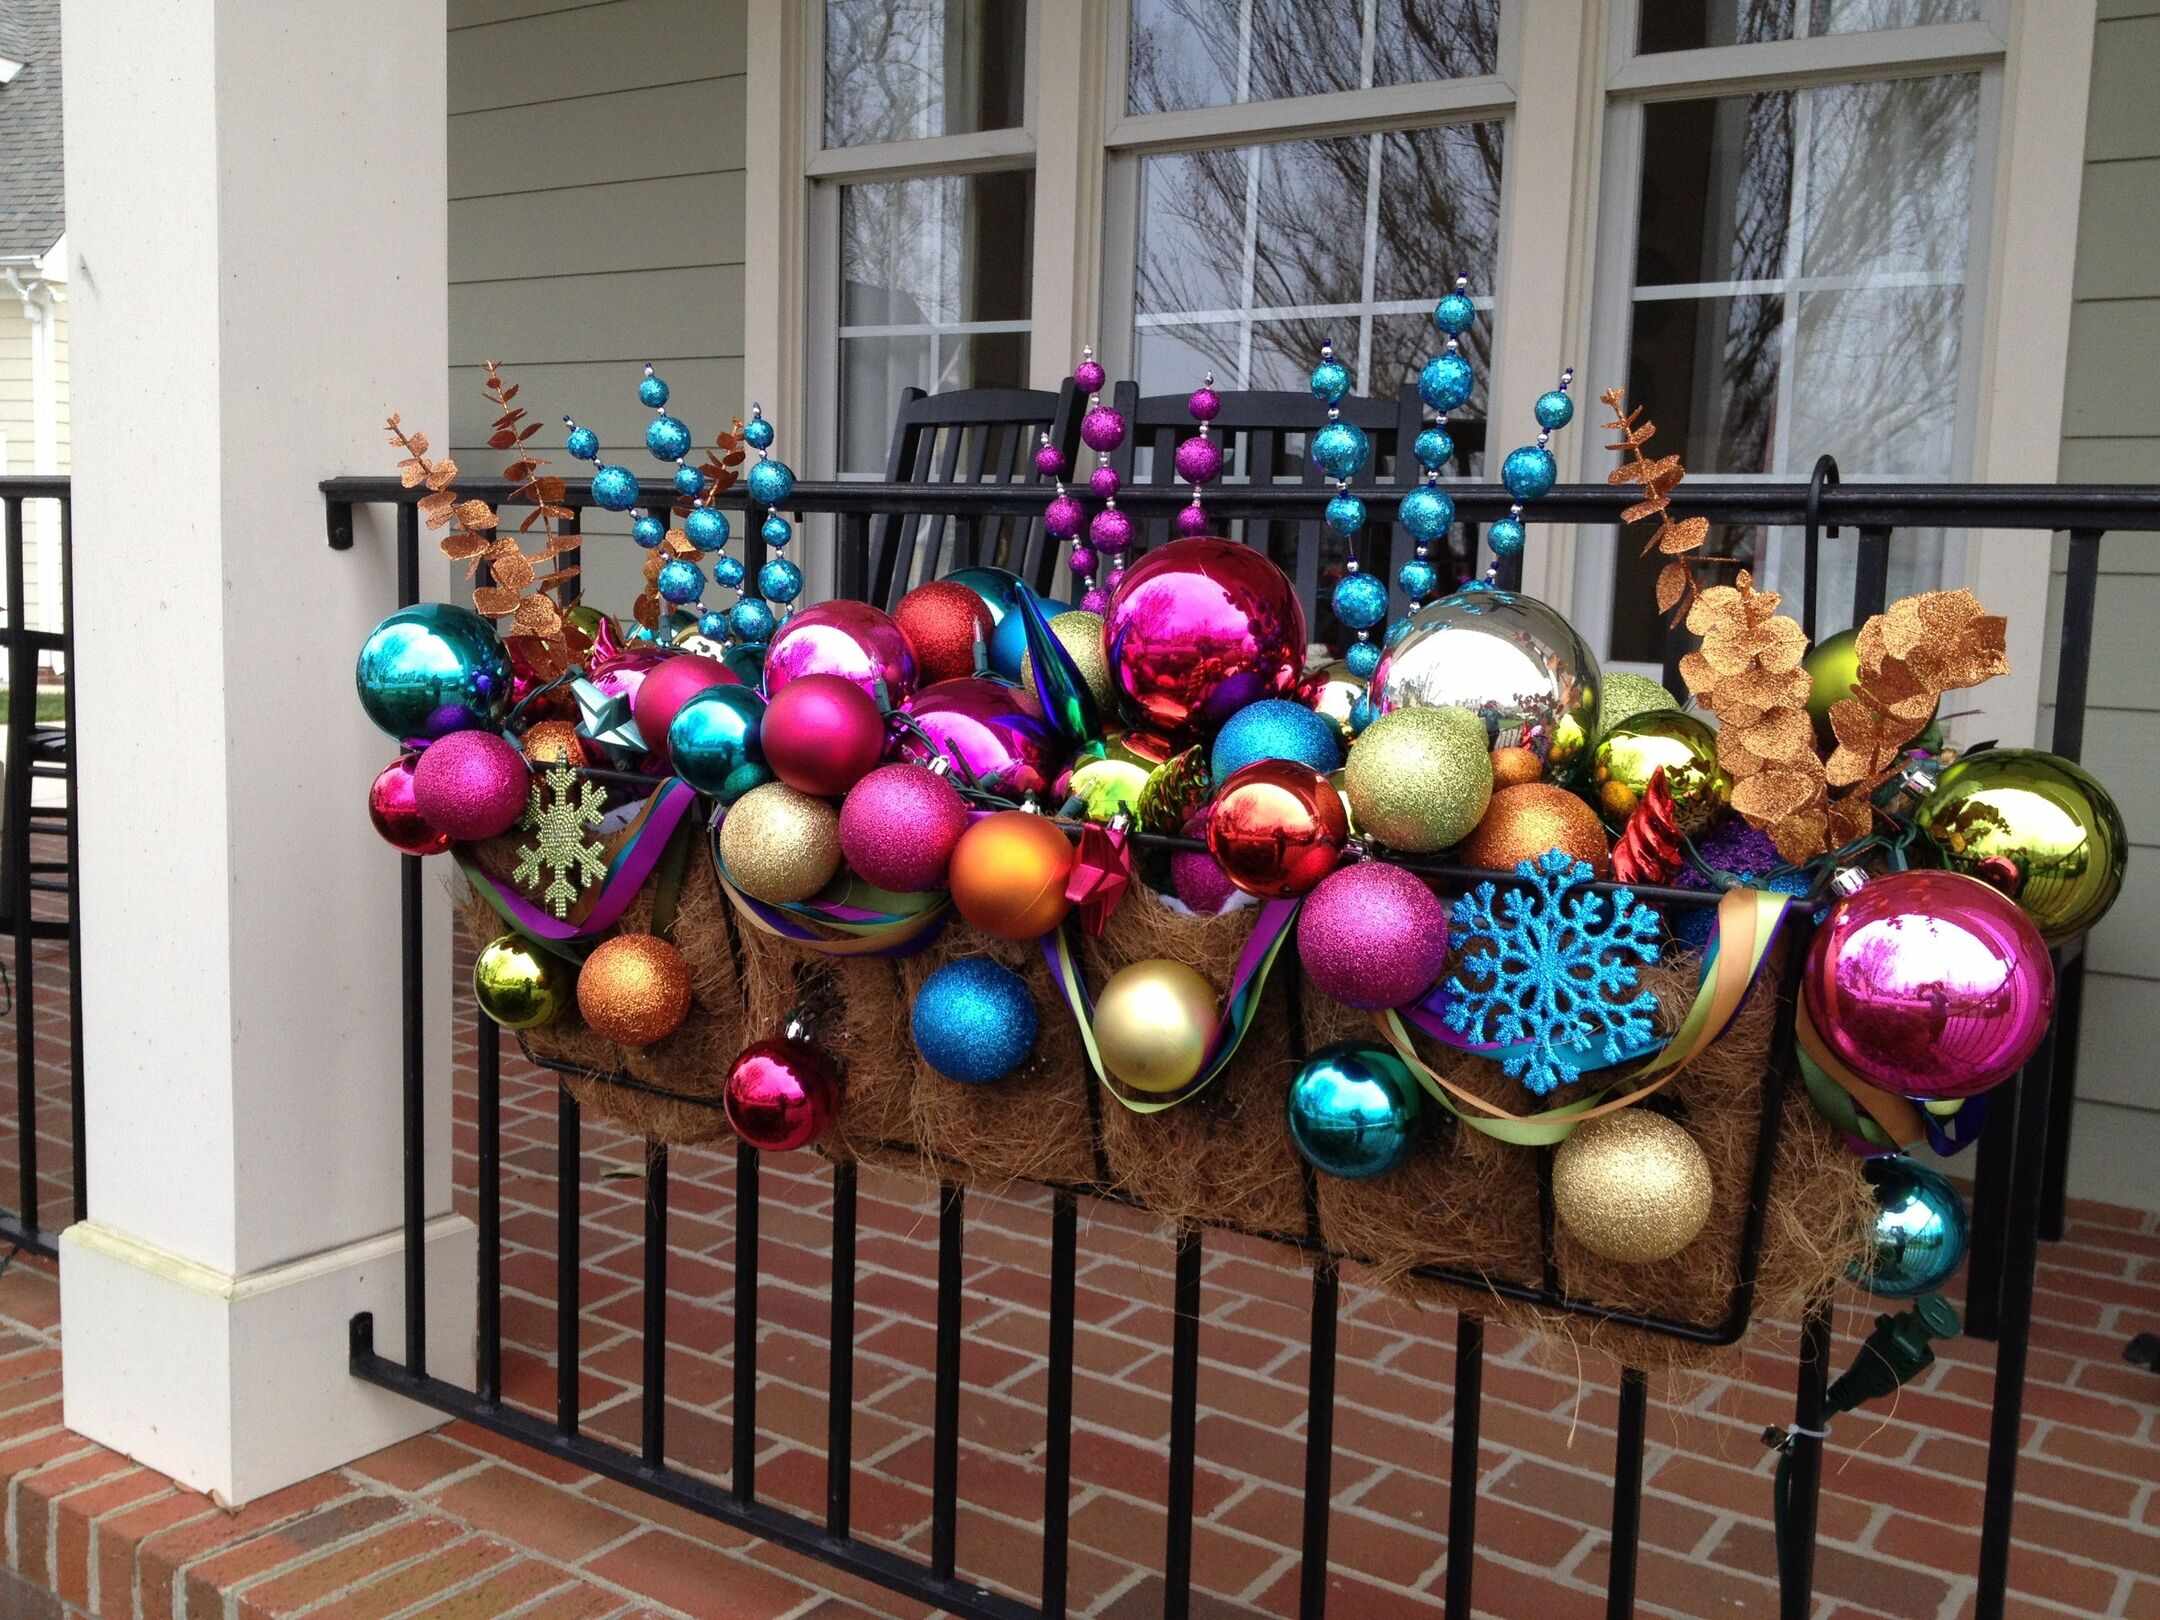 How To Make Your Own Outdoor Christmas Decorations